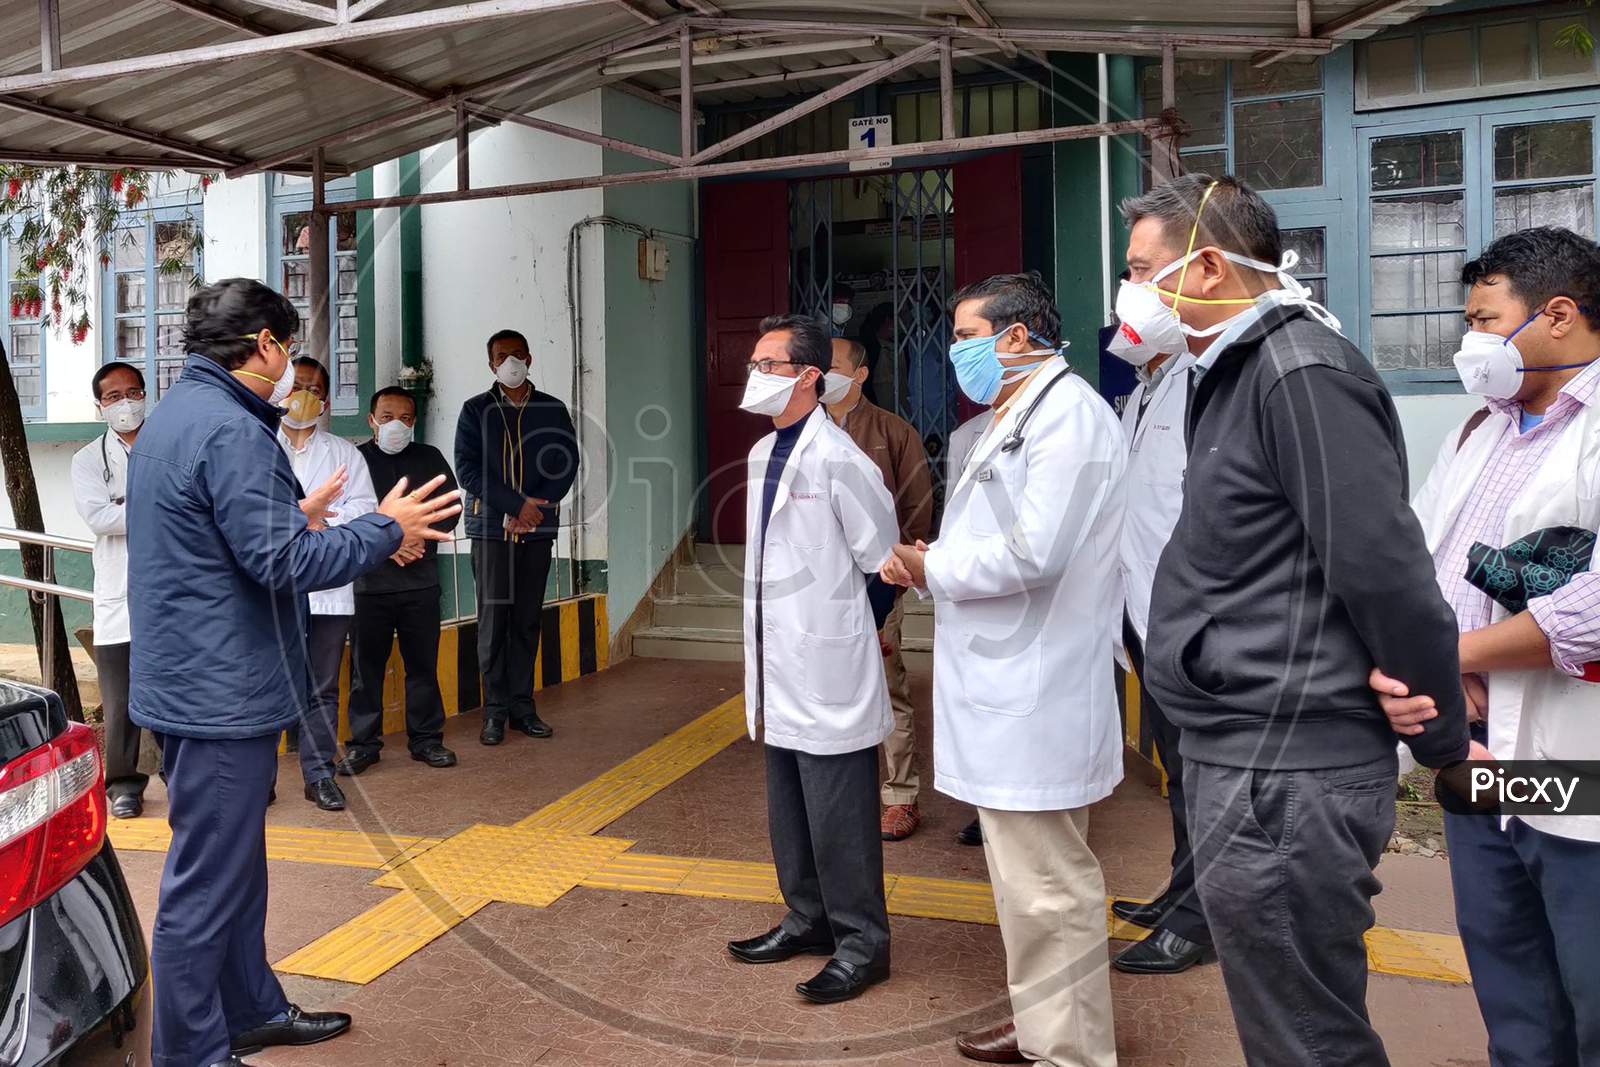 Meghalaya  Chief Minister Conrad Sangma Visited The Covid19 Hospital For A Review Meeting With The Doctors And Officials  At Civil Hospital ,Shillong In Meghalaya On April 17,2020